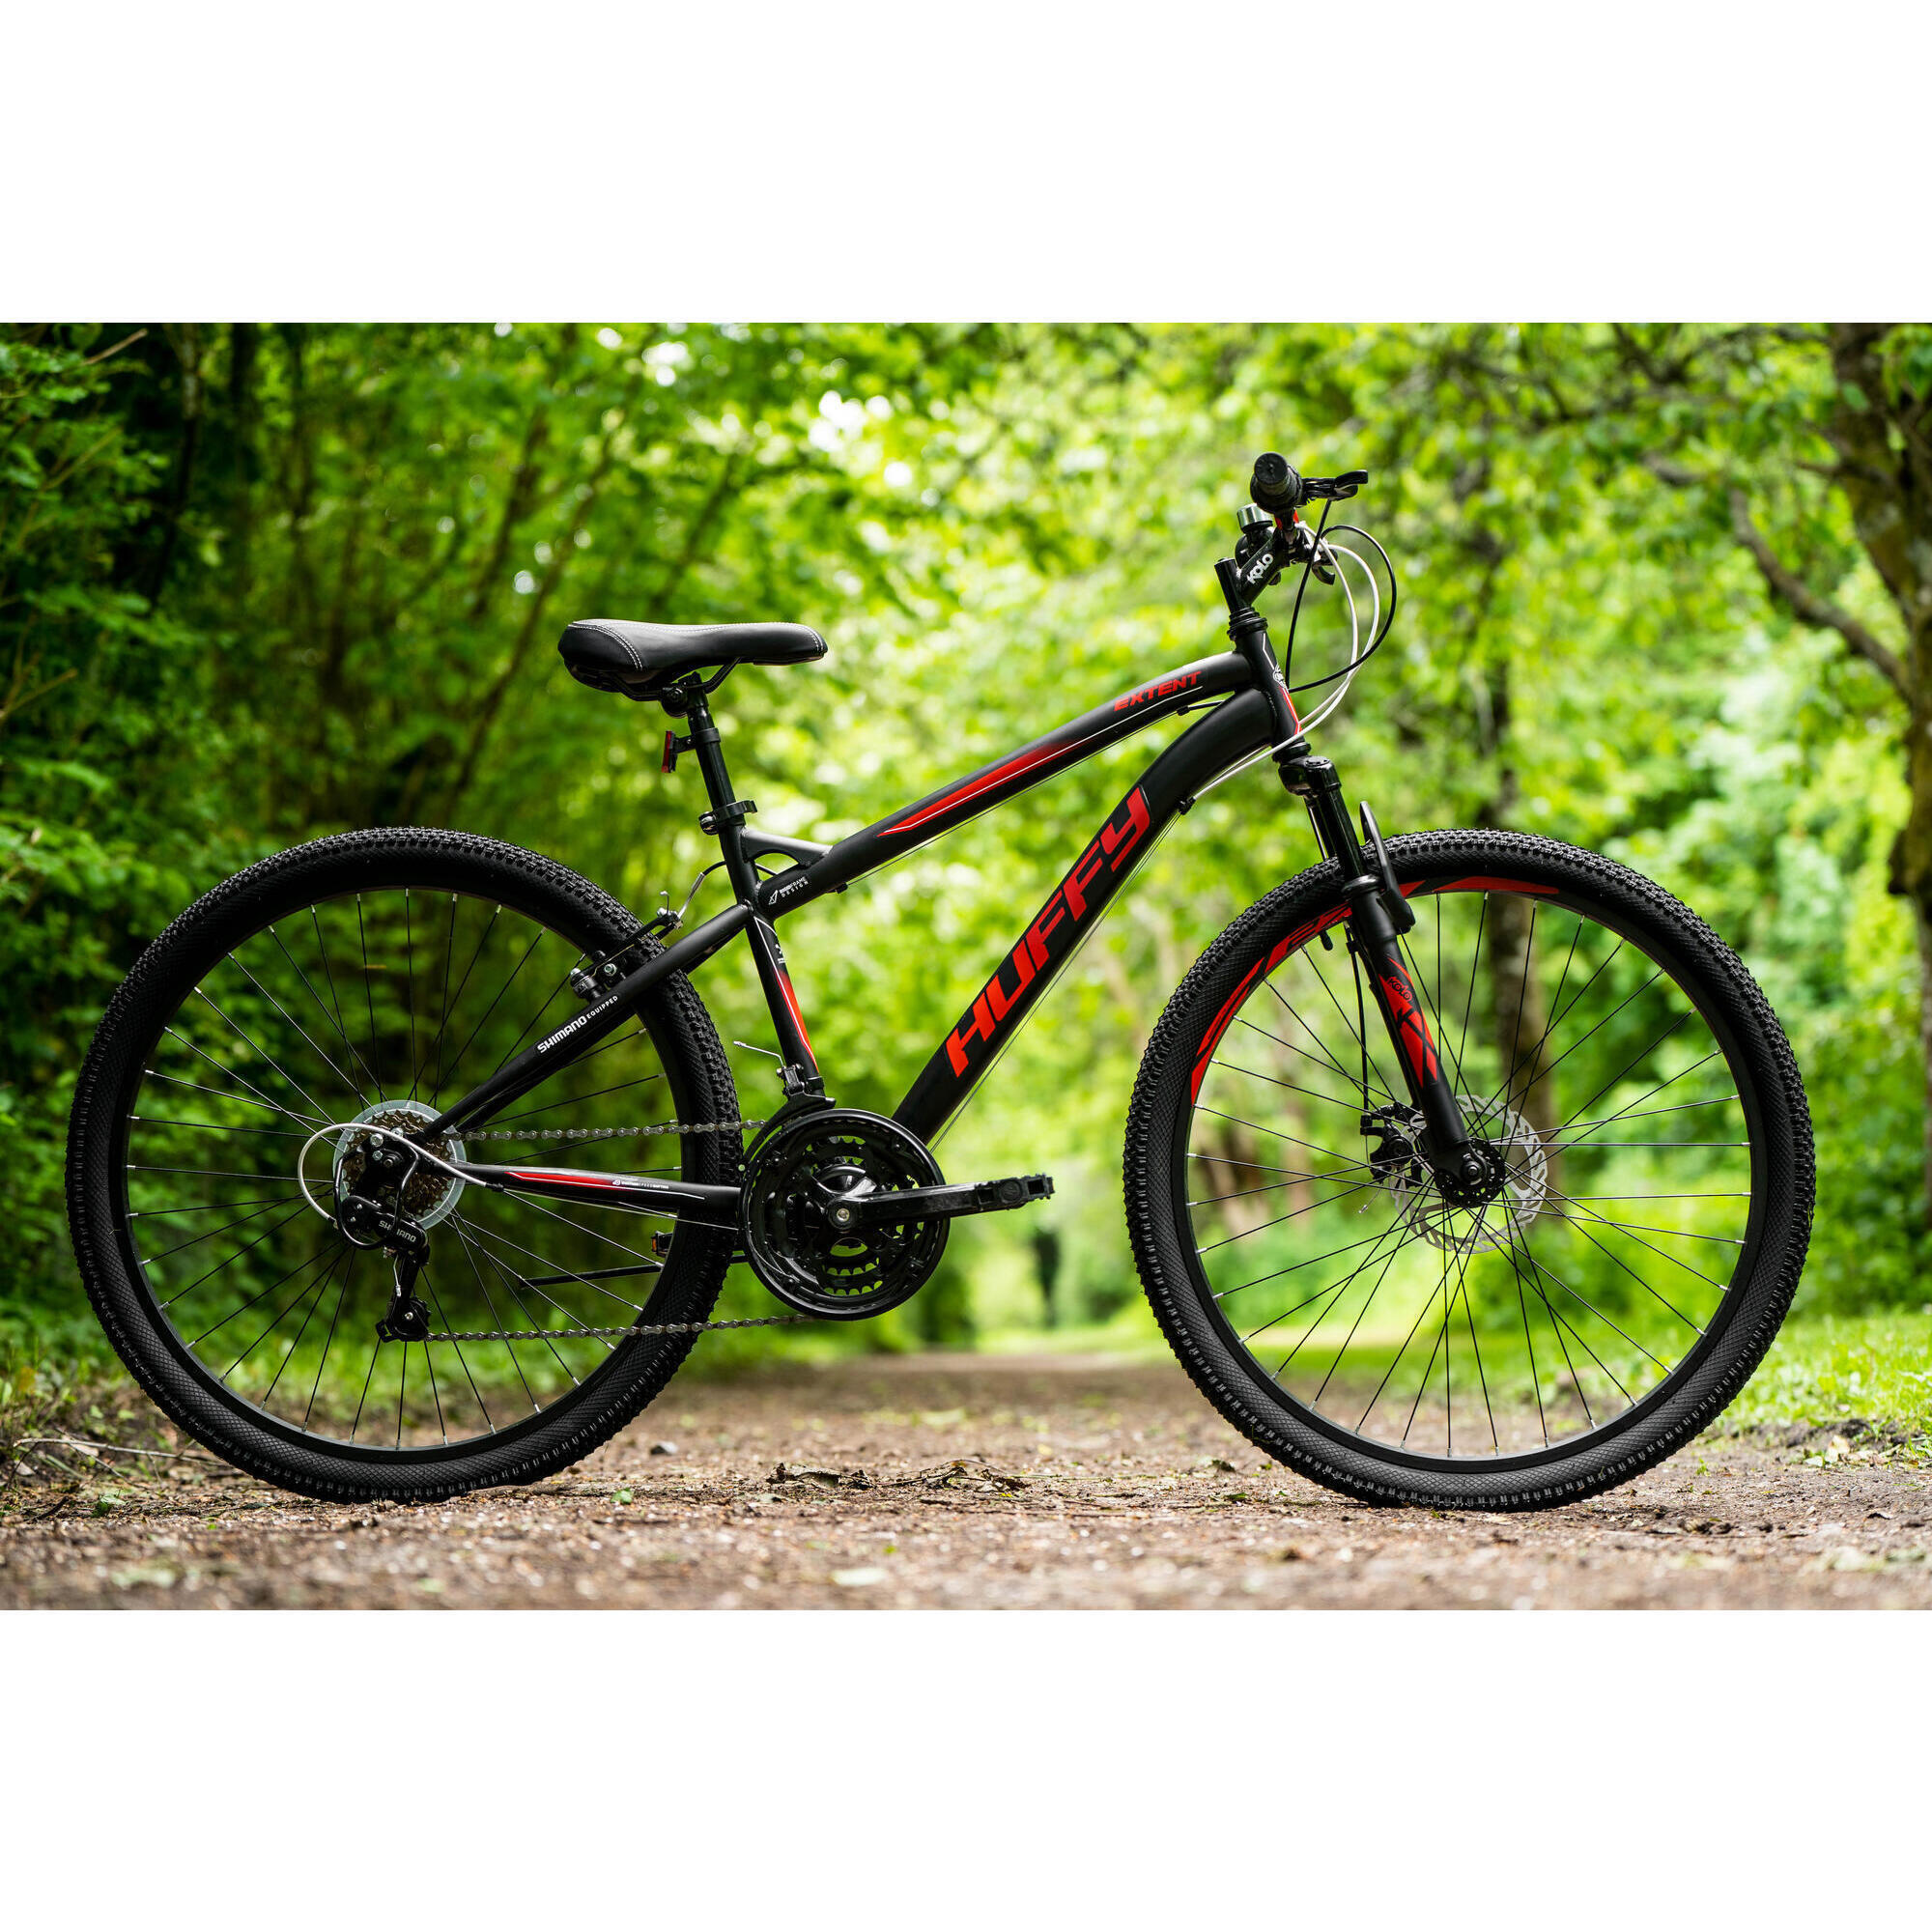 Huffy Extent Mens Mountain Bike 27.5" Wheels 18 Speed Black + Red 4/5